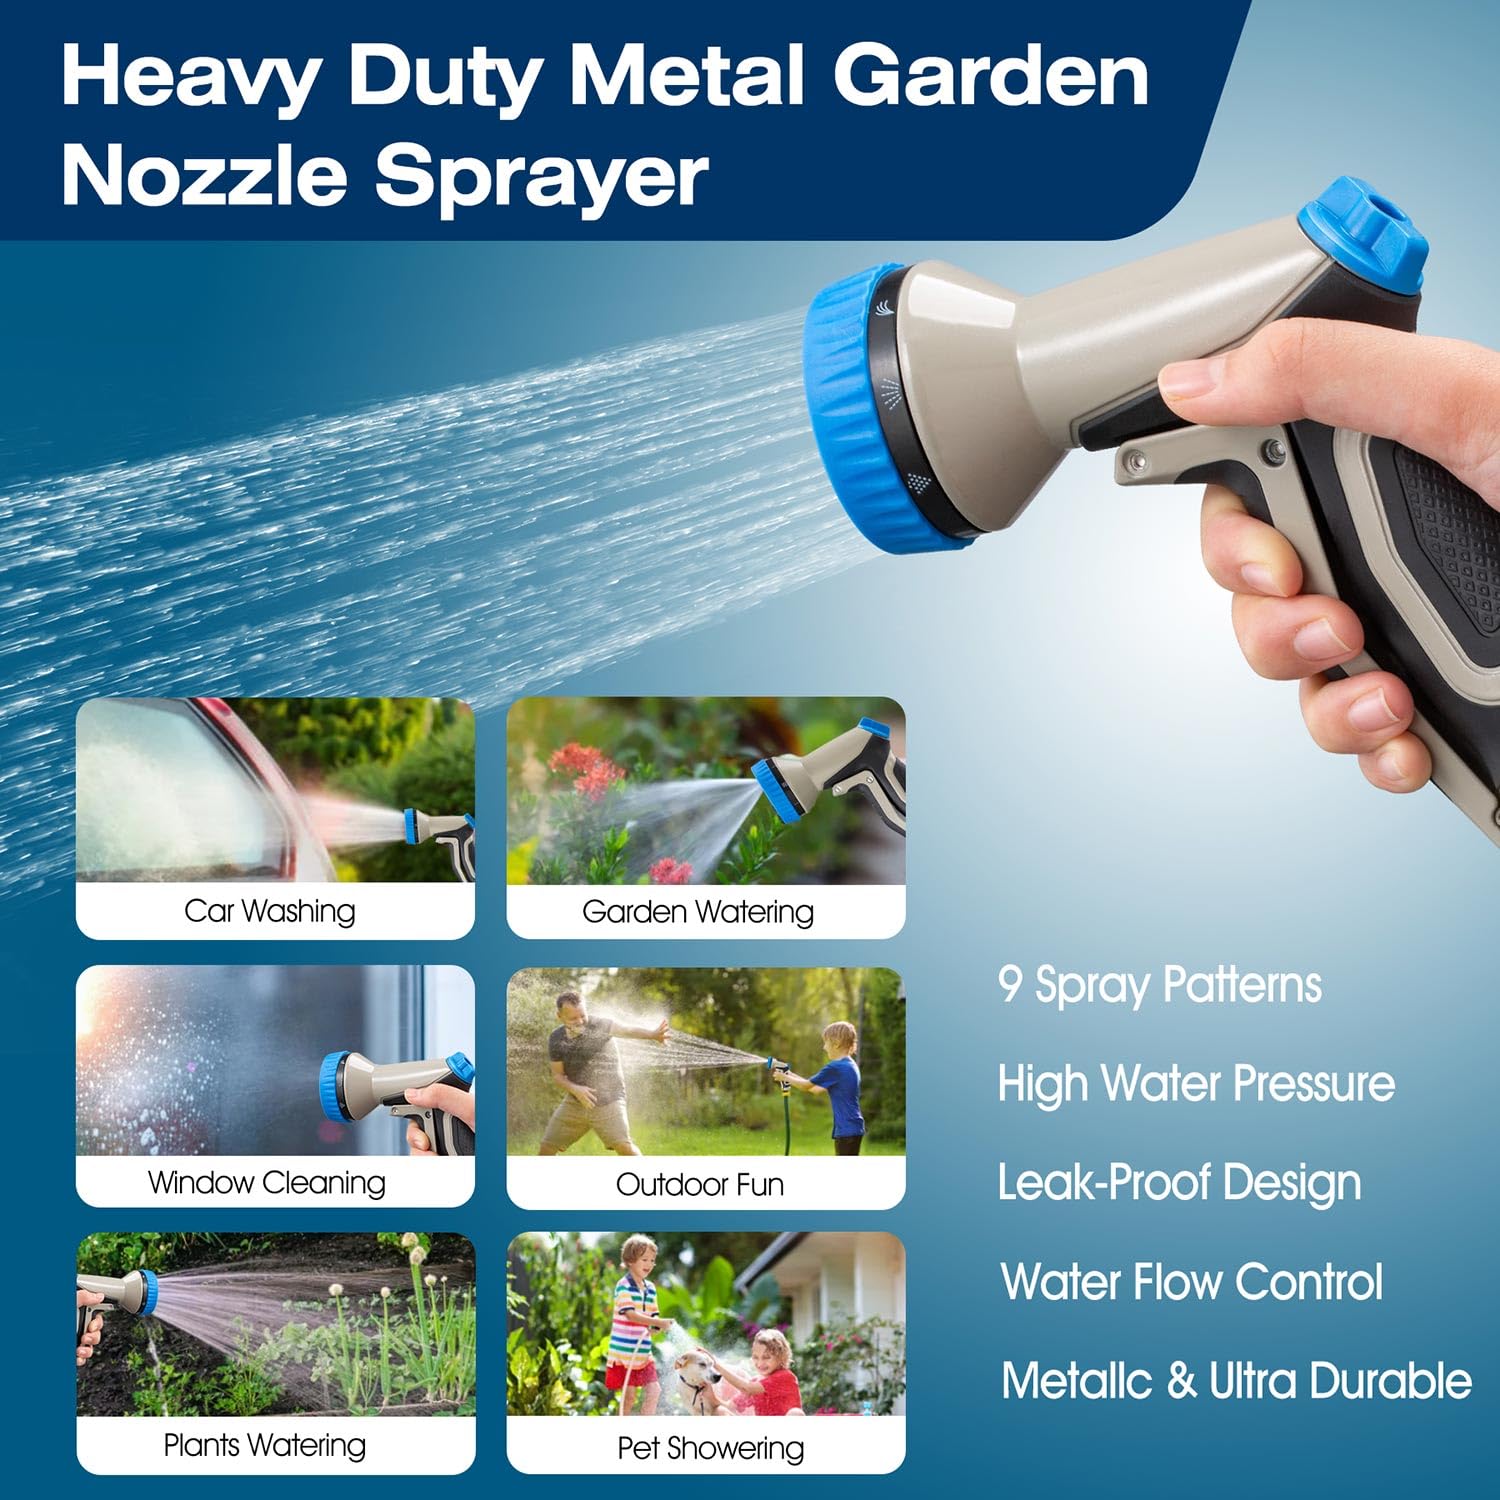 Gsinodrs Garden Hose Nozzle, Heavy Duty Metal Water Hose Nozzle with 9 Adjustable Spray Patterns, High Pressure Hand Sprayer with Flow Control for Watering Plants & Lawns, Washing Cars & Pets